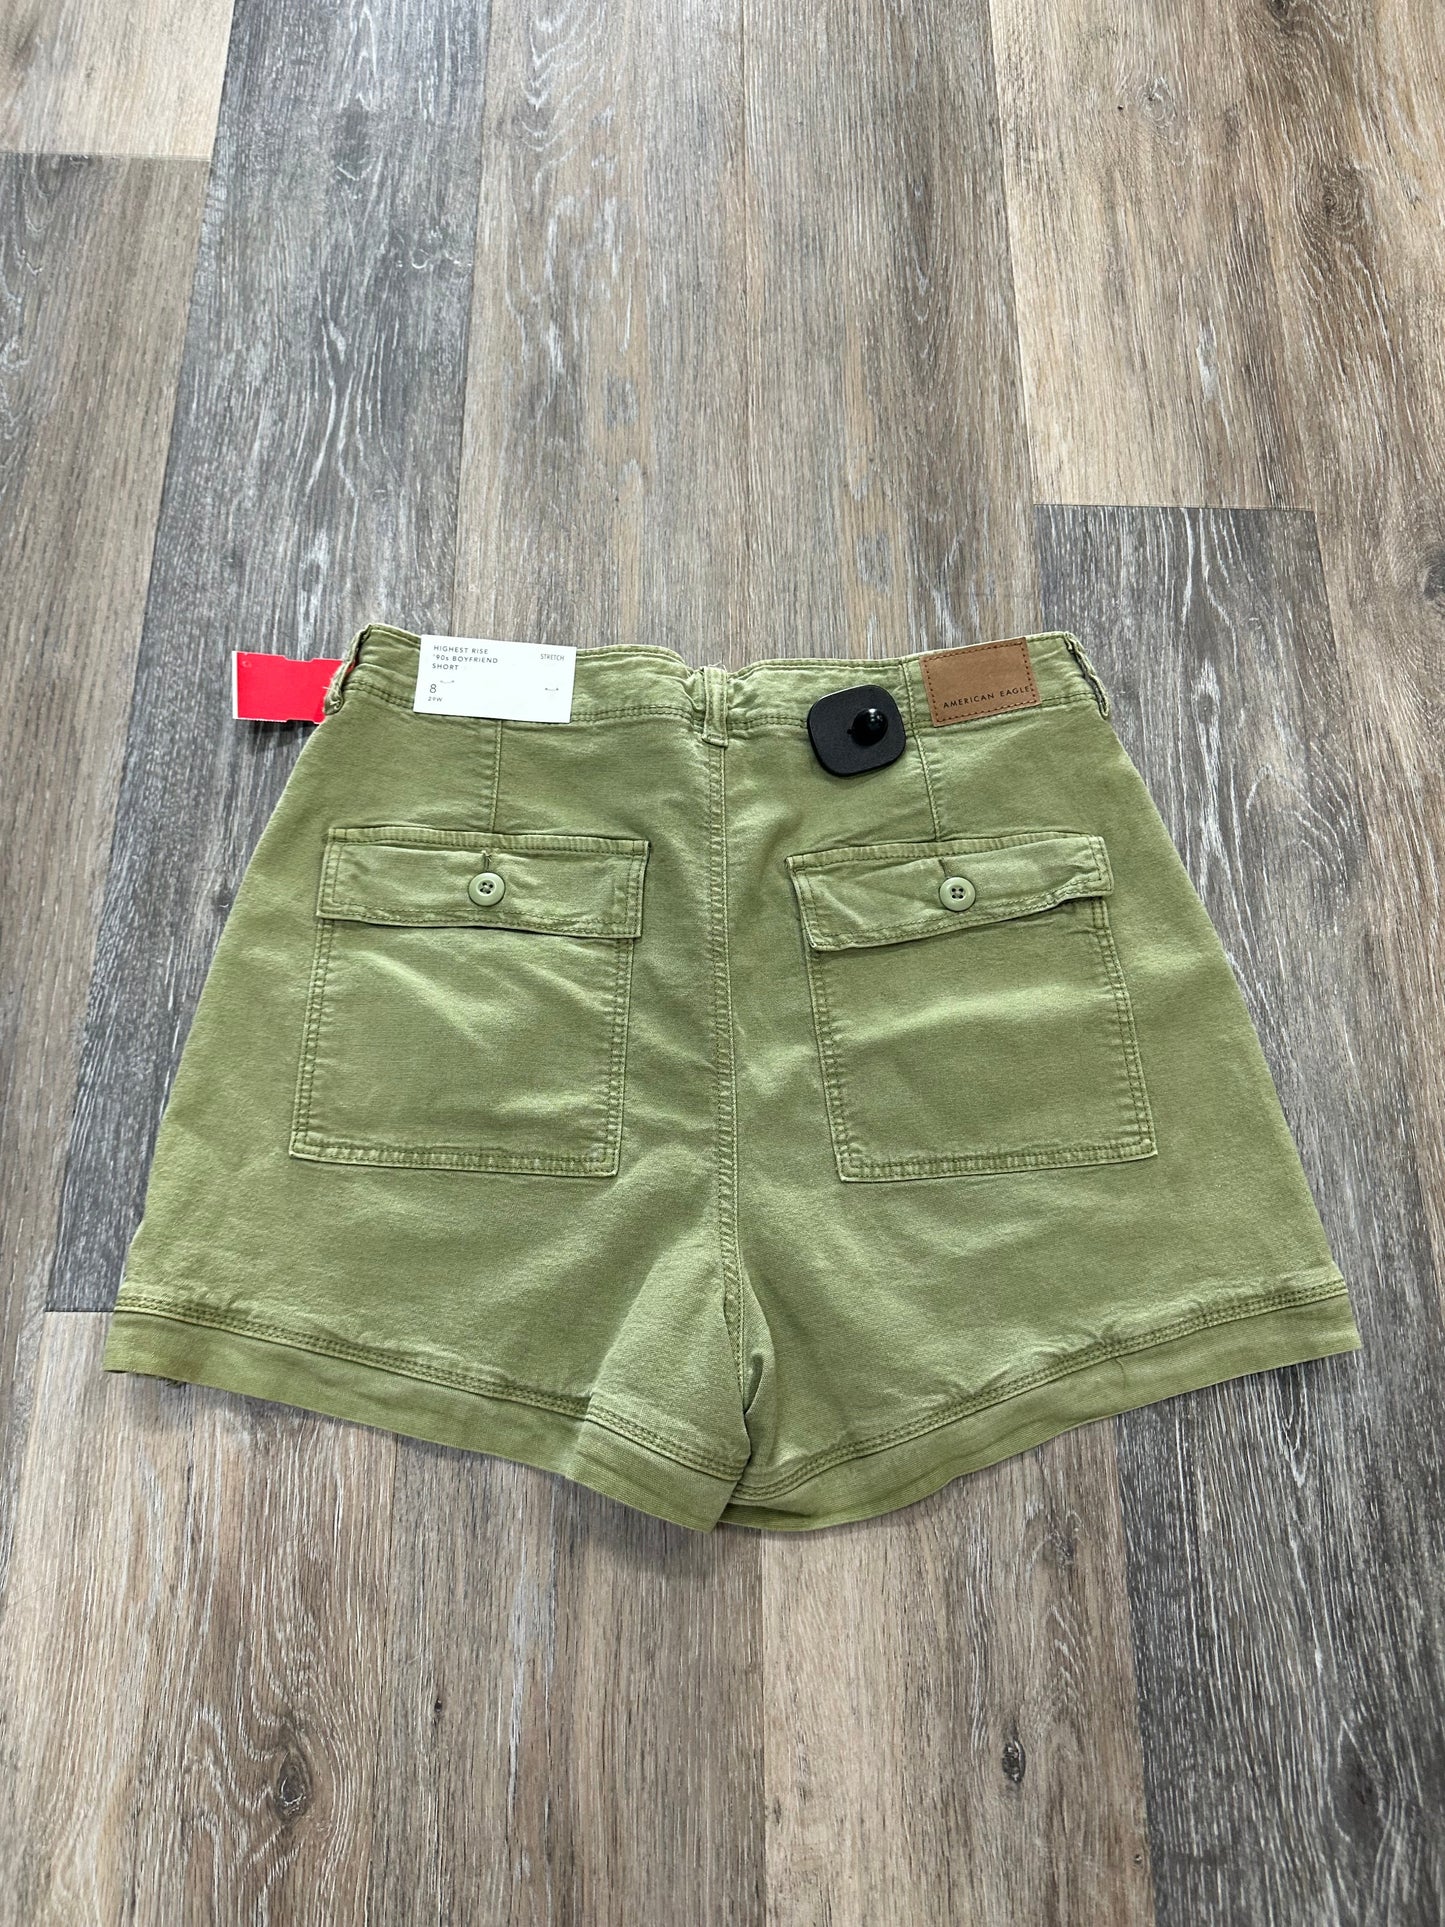 Green Shorts American Eagle, Size 8